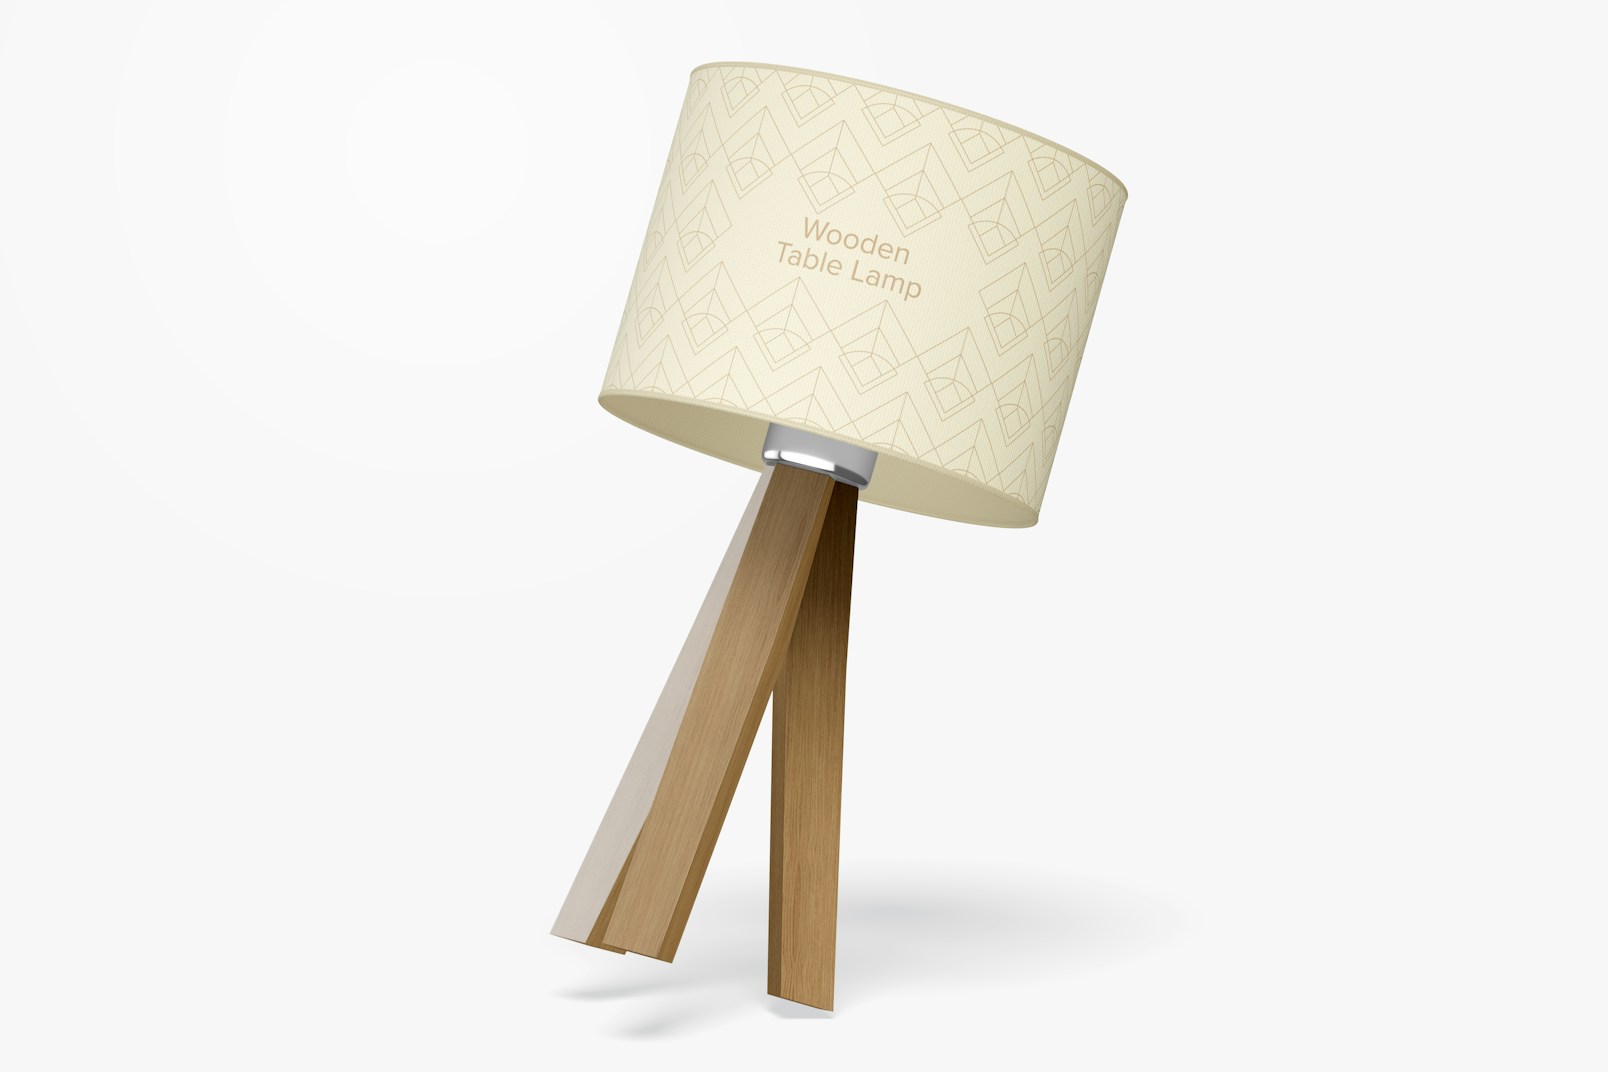 Wooden Table Lamp Mockup, Floating